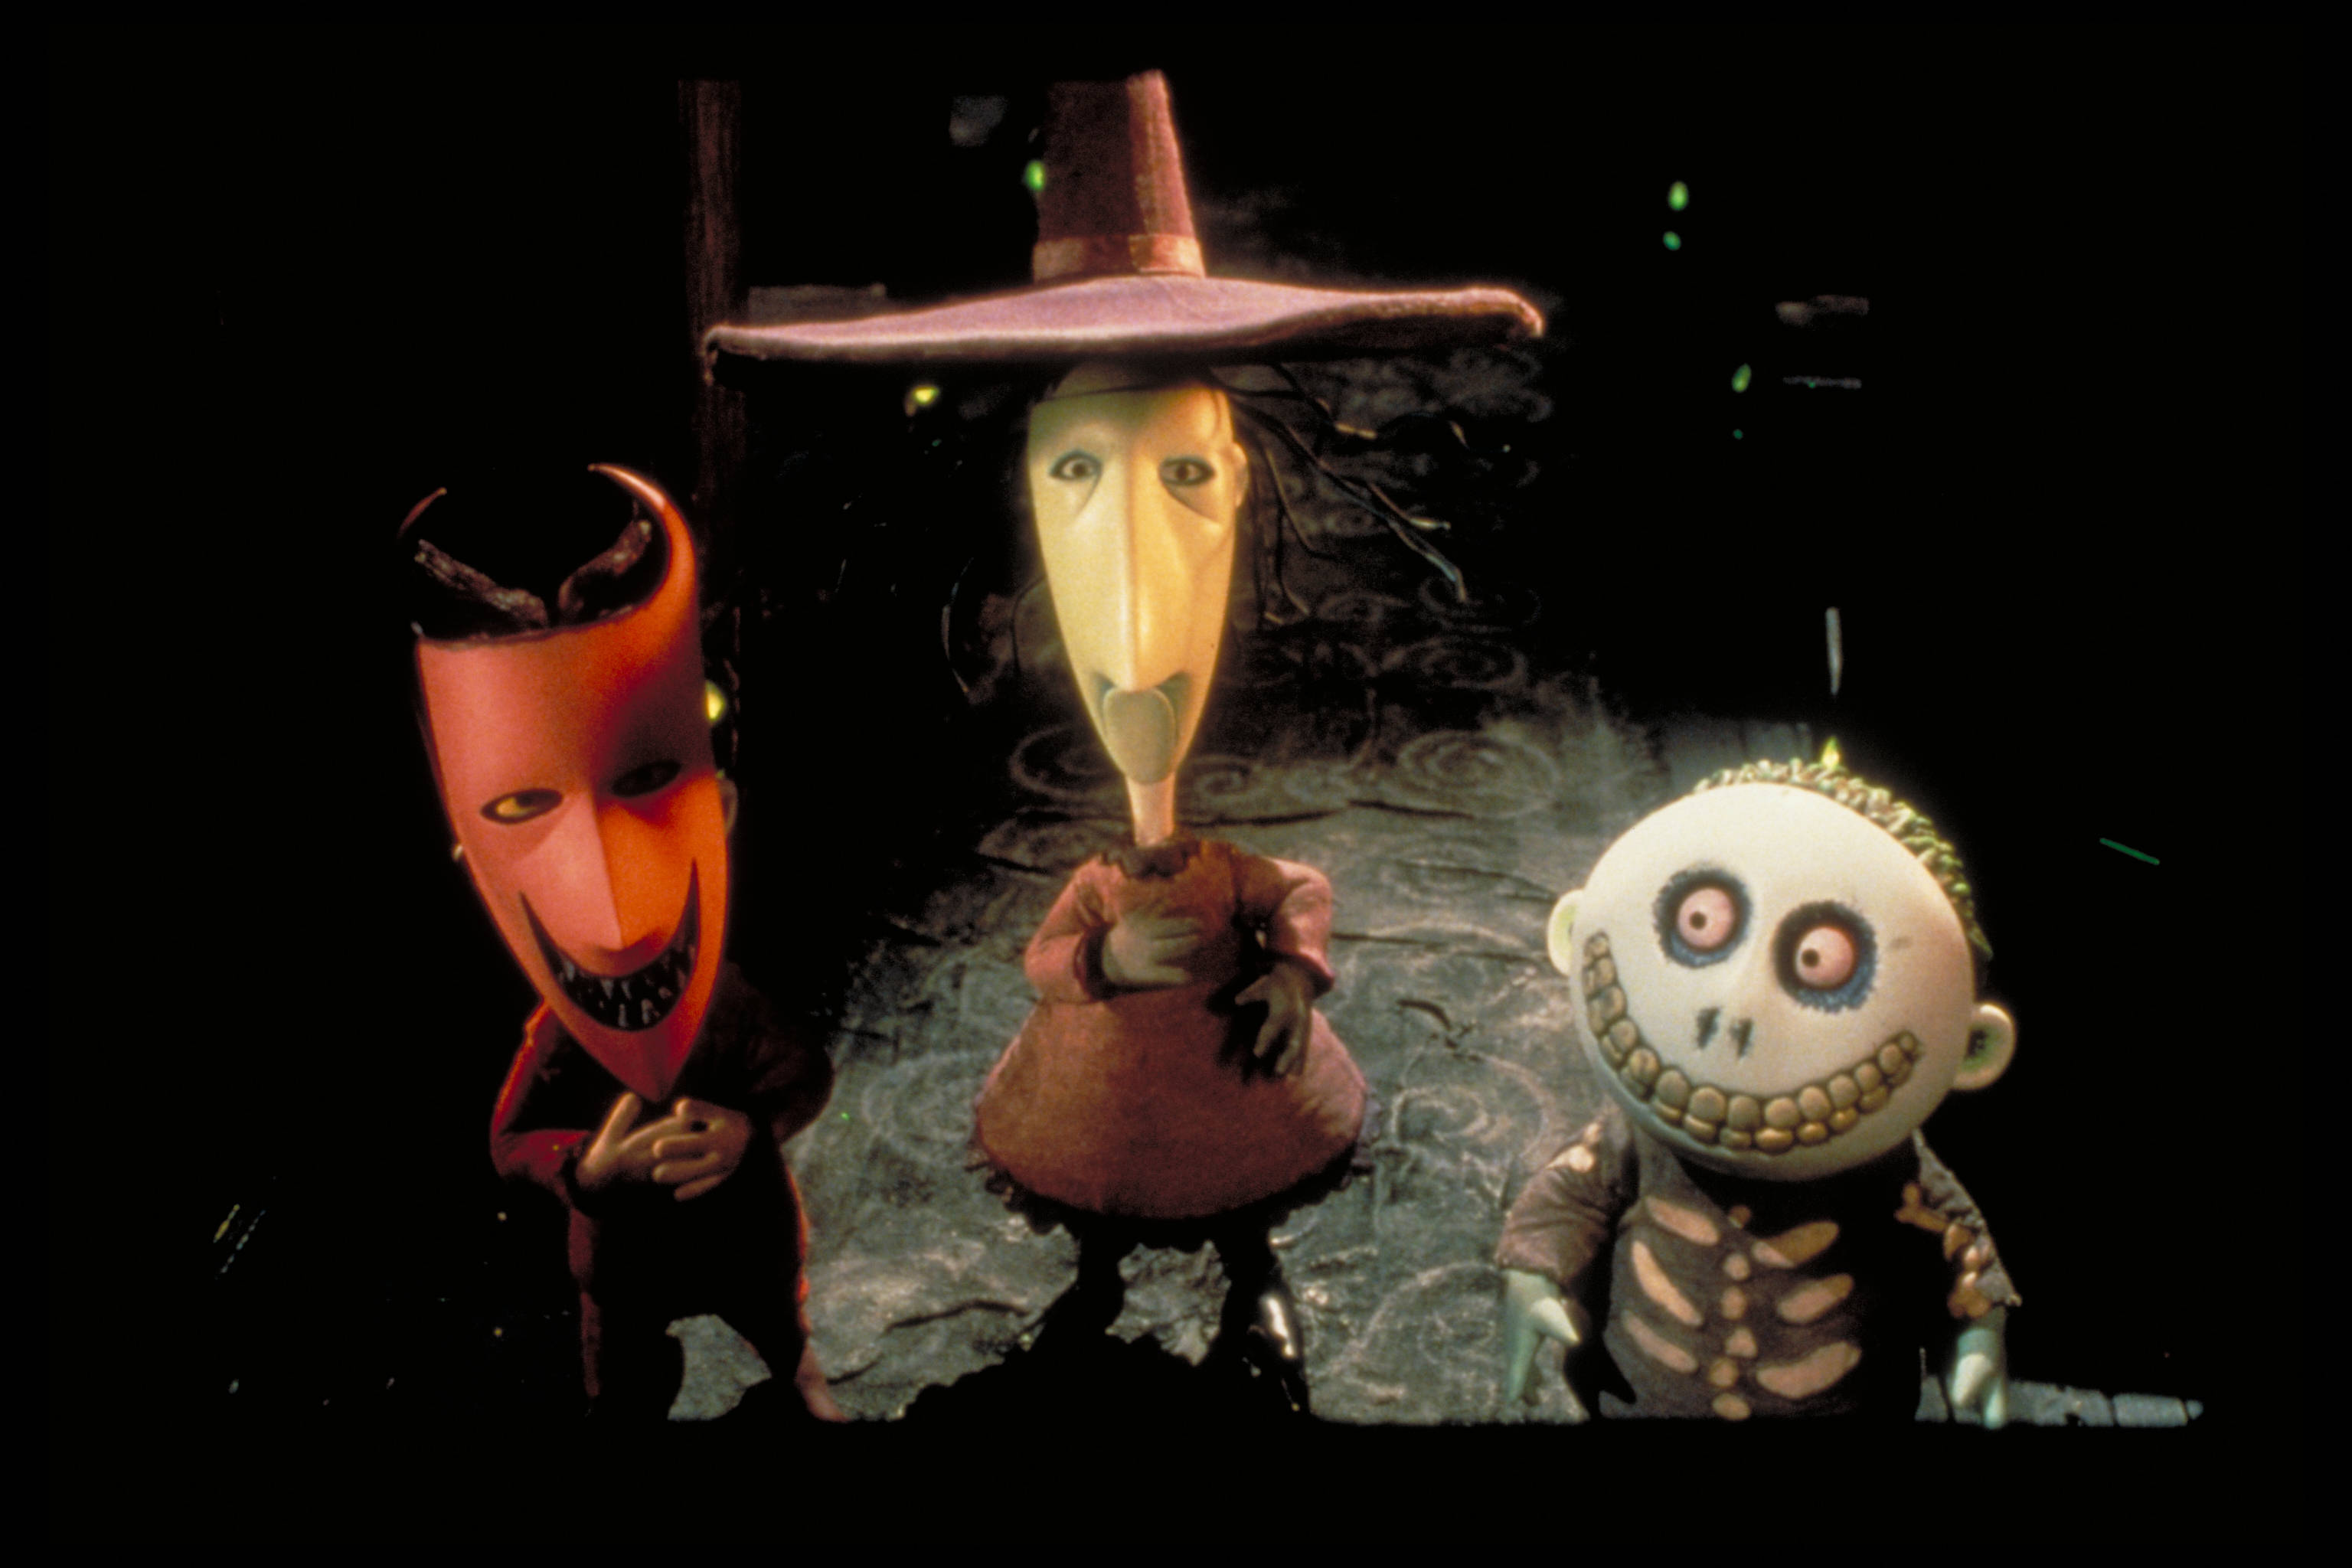 The Nightmare Before Christmas Had A Beginning Even Weirder Than The Actual Film